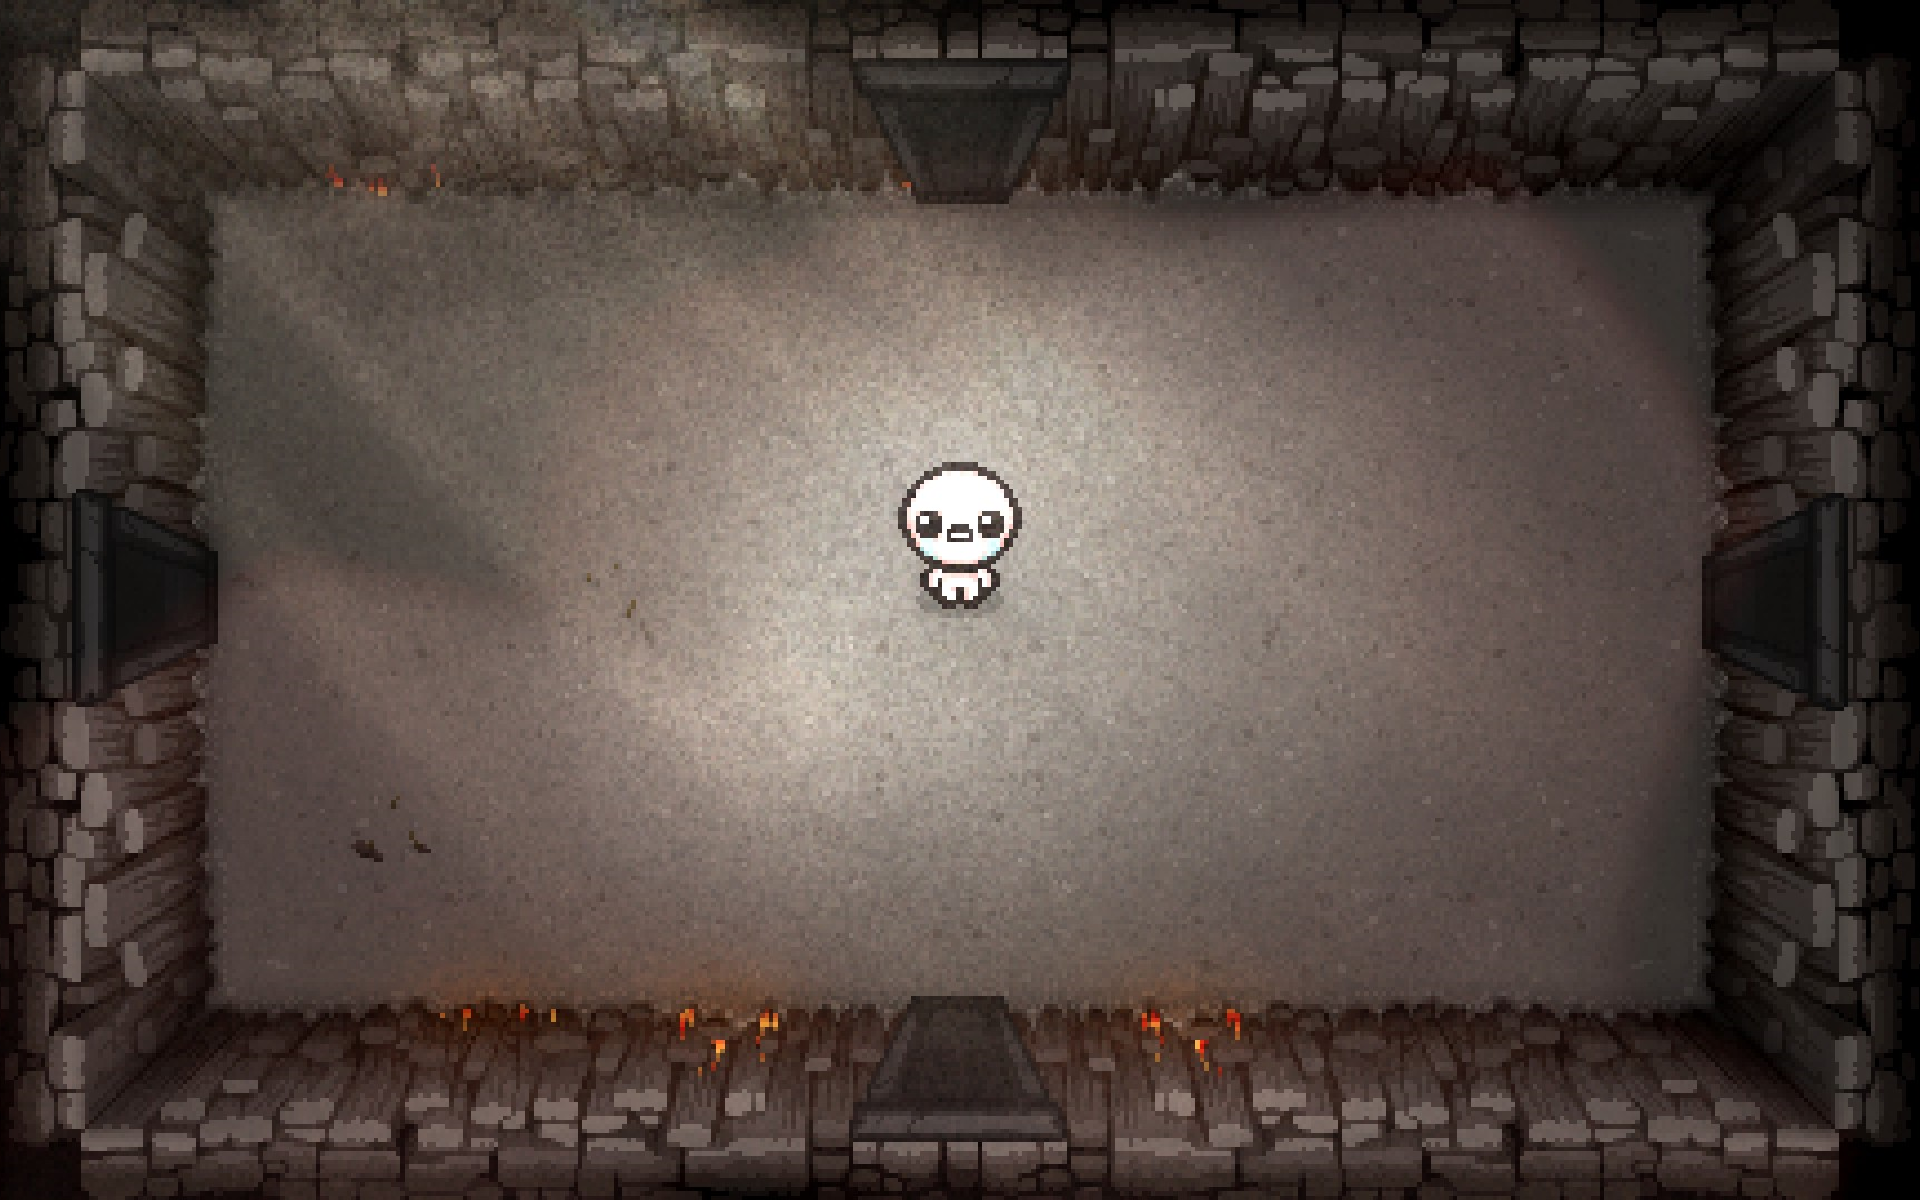 binding of isaac console commands remove curse